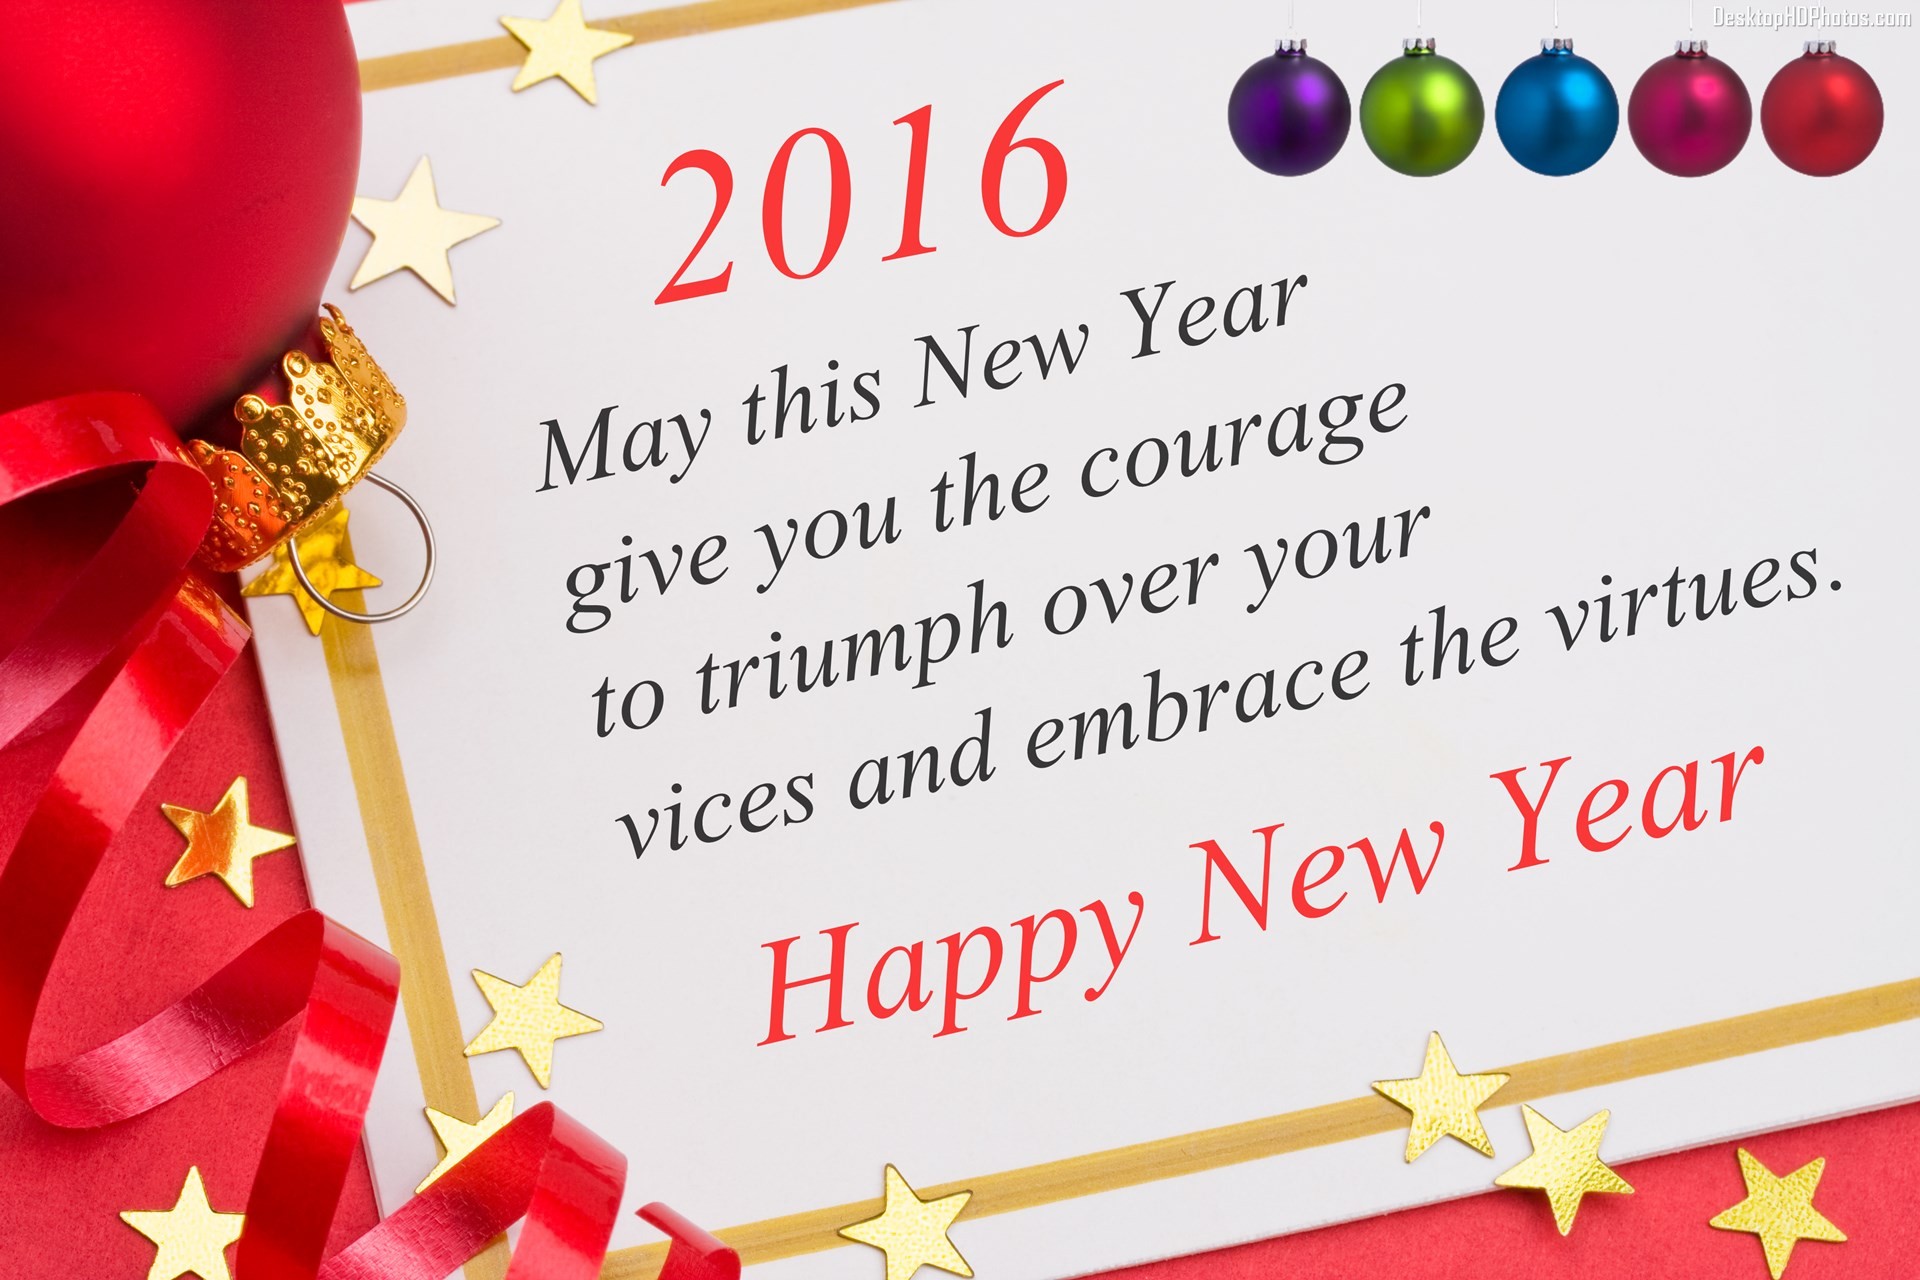 Happy New Year 2016 hd Images, Wallpapers 